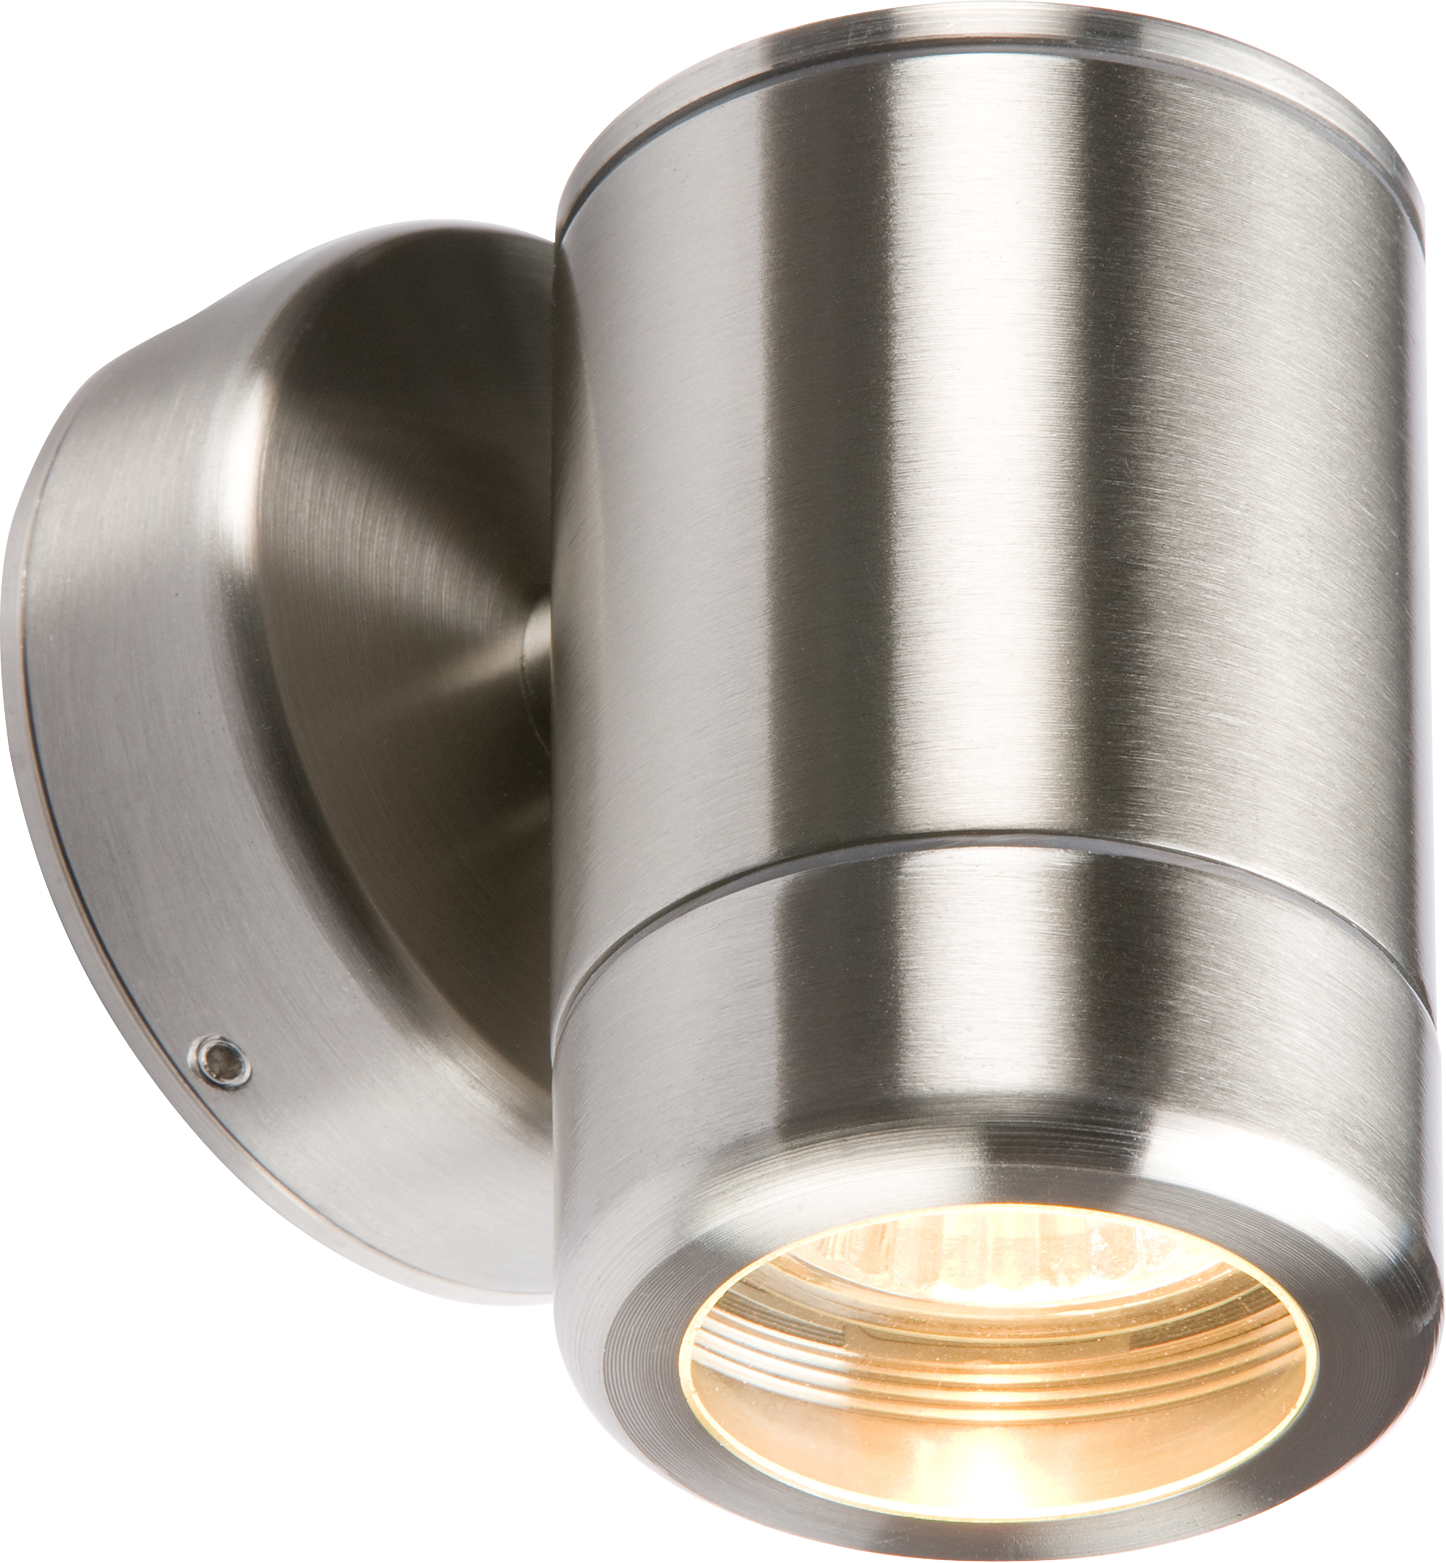 IP65 Stainless Steel Single Fixed GU10 35W Fitting - WALL1 